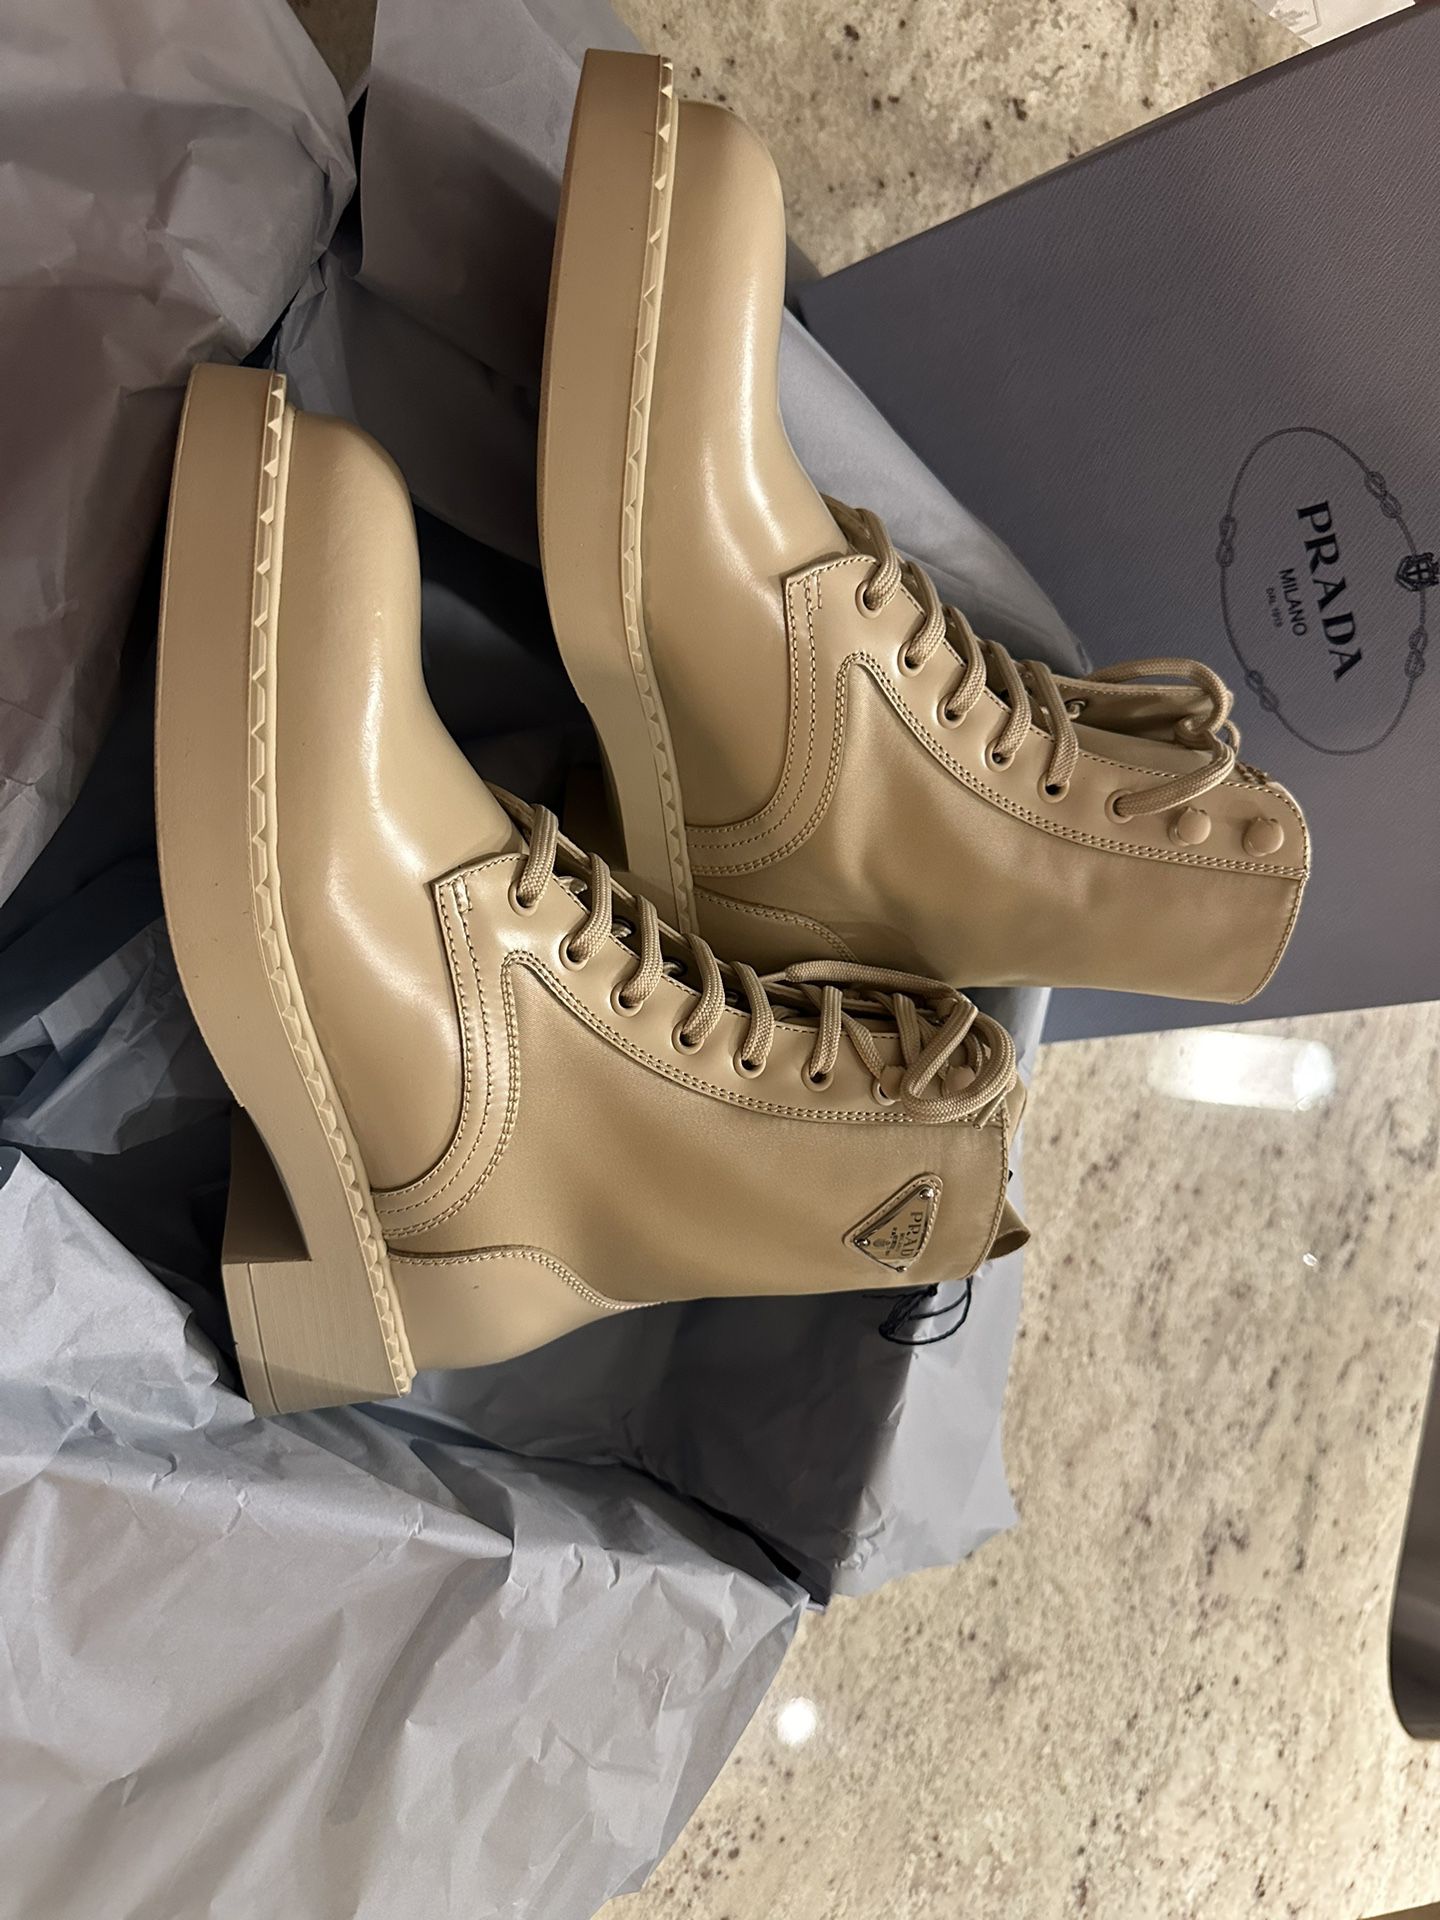 Prada Brushed-leather and Re-Nylon boots, size 39 beige